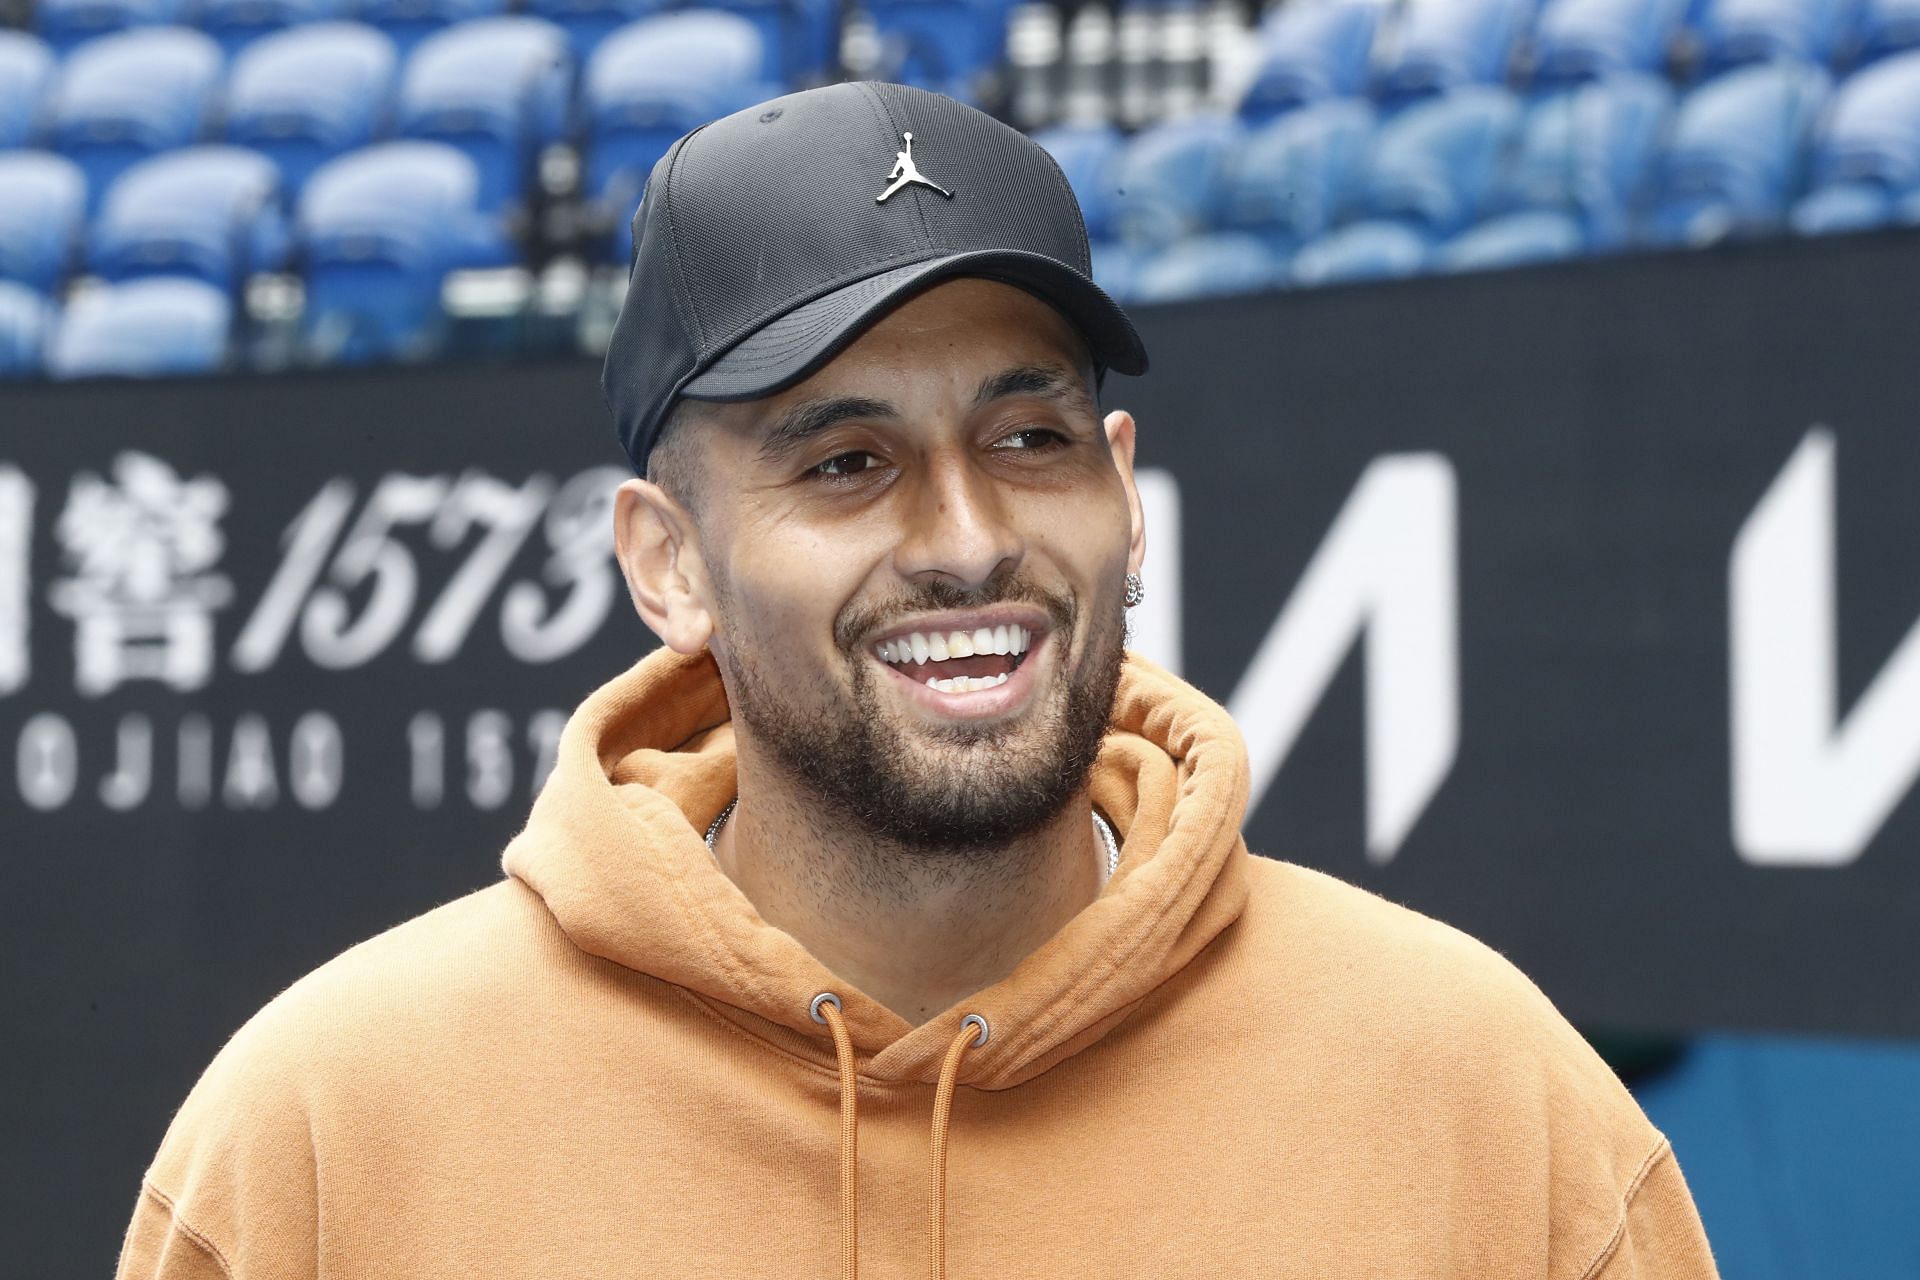 Nick Kyrgios could return to action at an exhibition event in May.